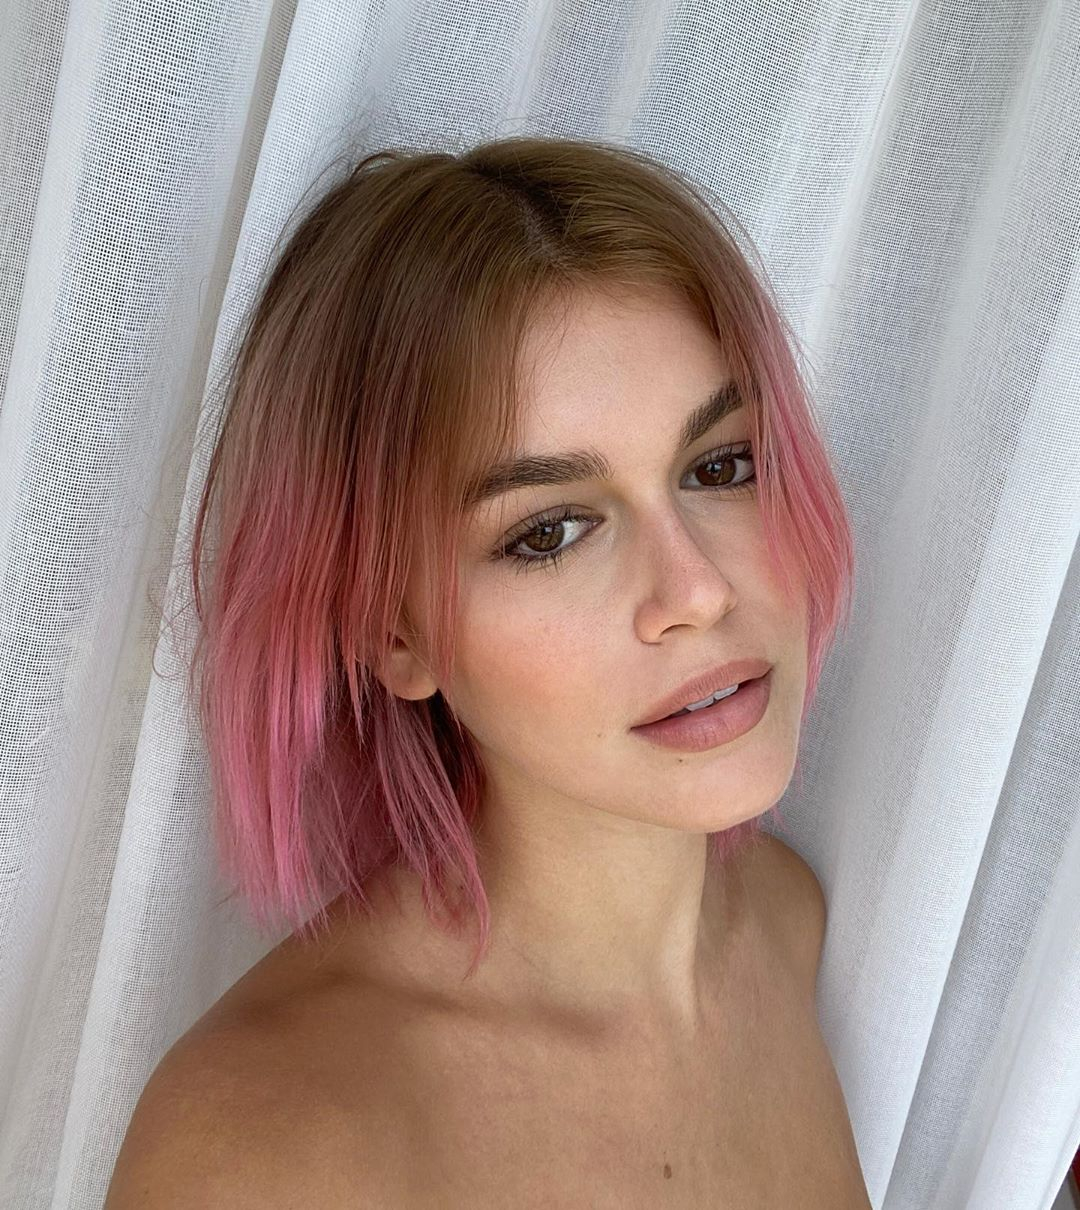 Kylie Jenner Dyed Her Hair Pink, and Now No One Knows What Year It Is